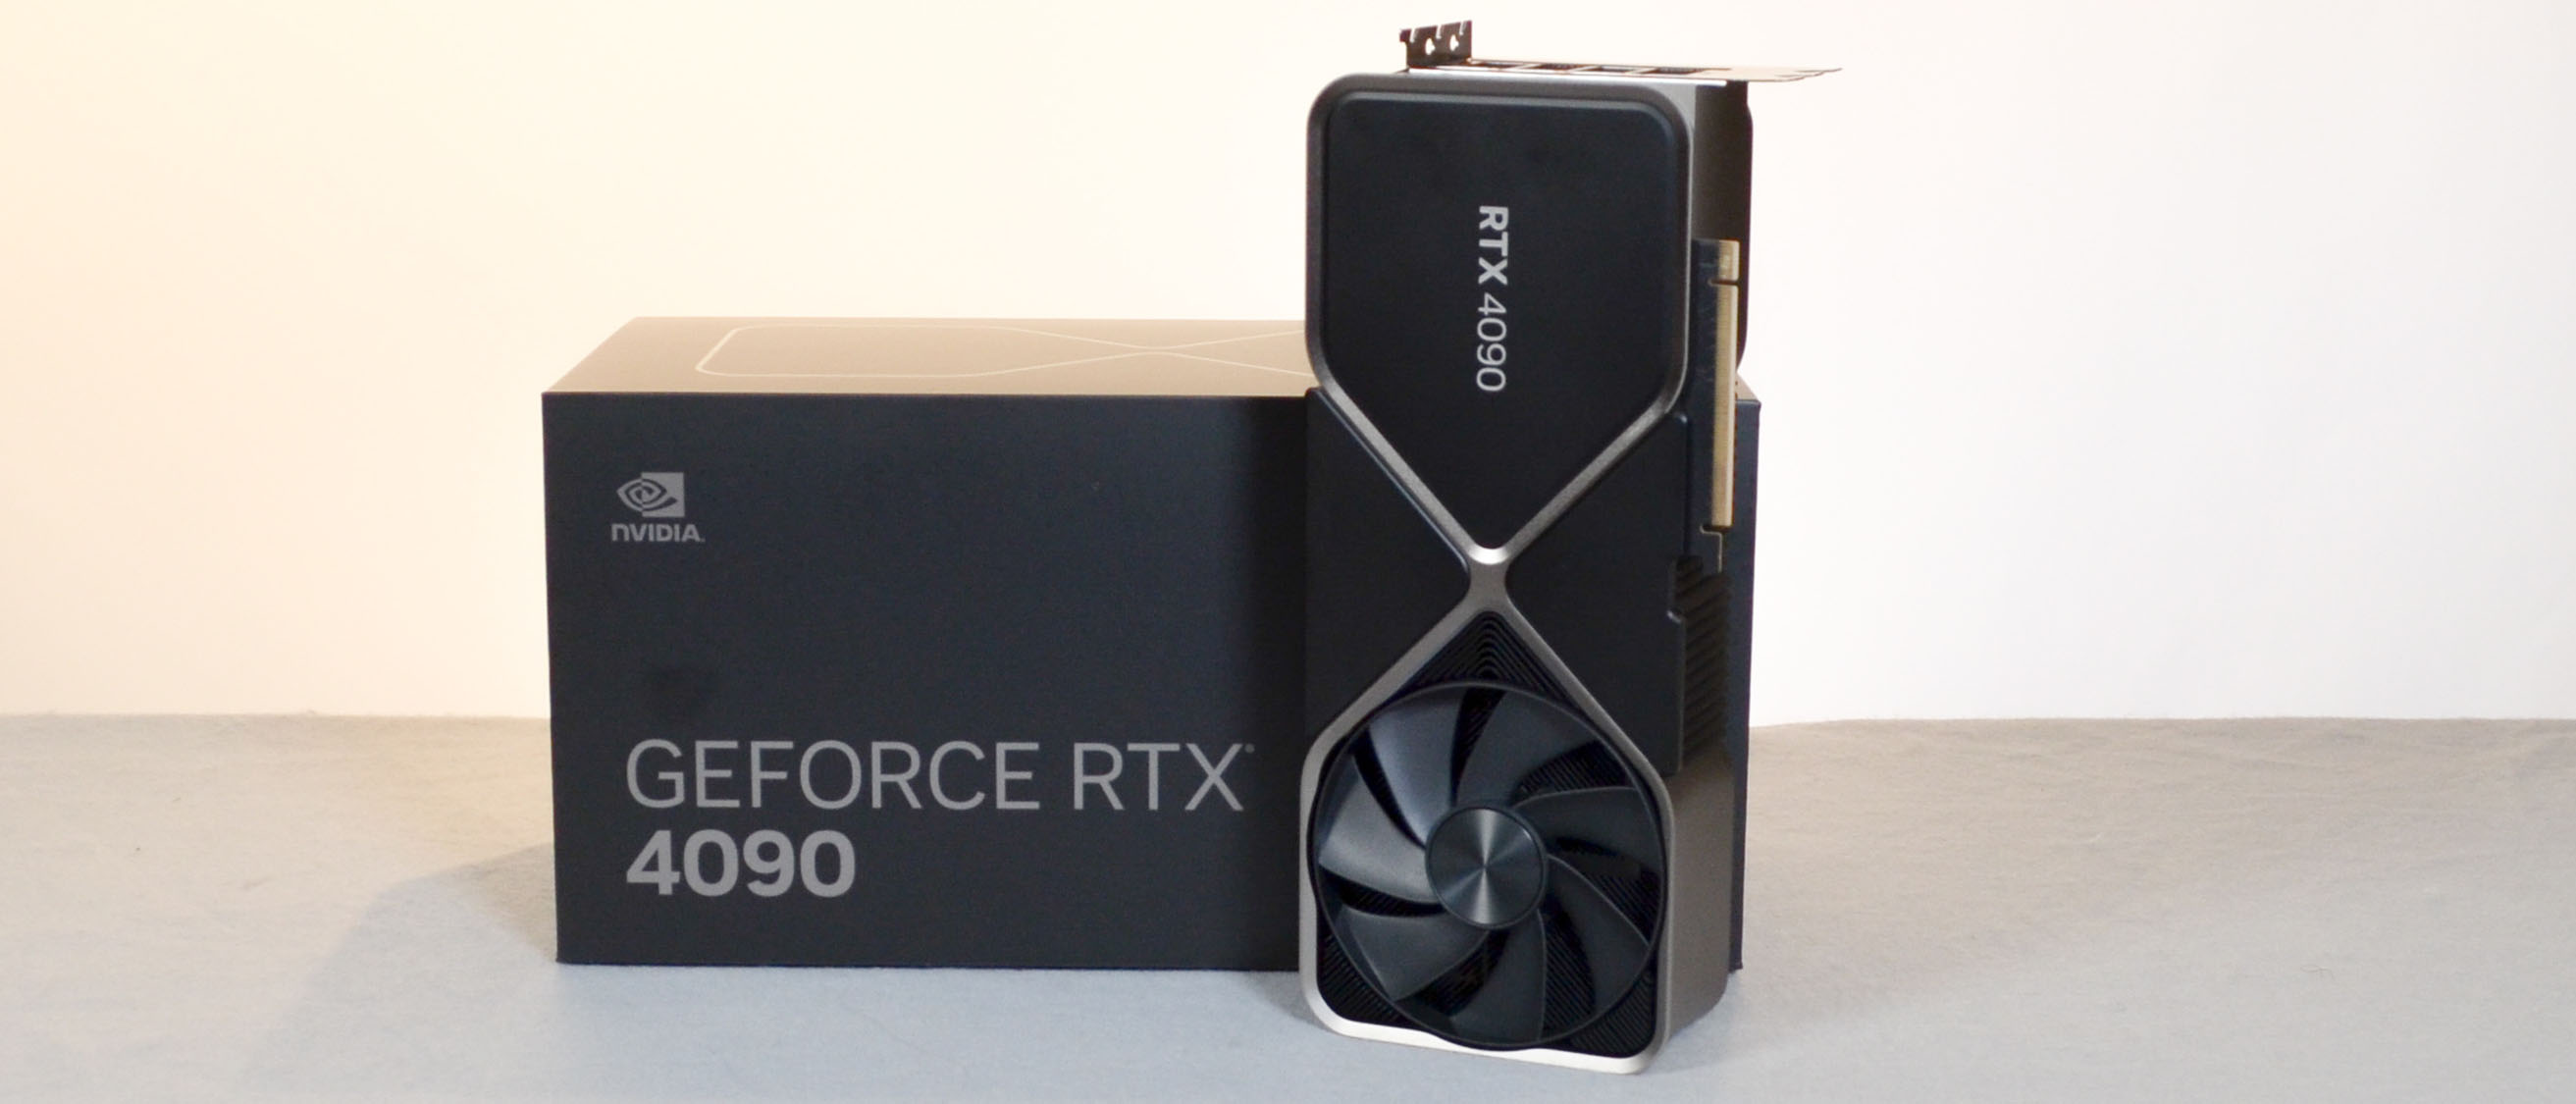 RTX 4090. New and powerful?